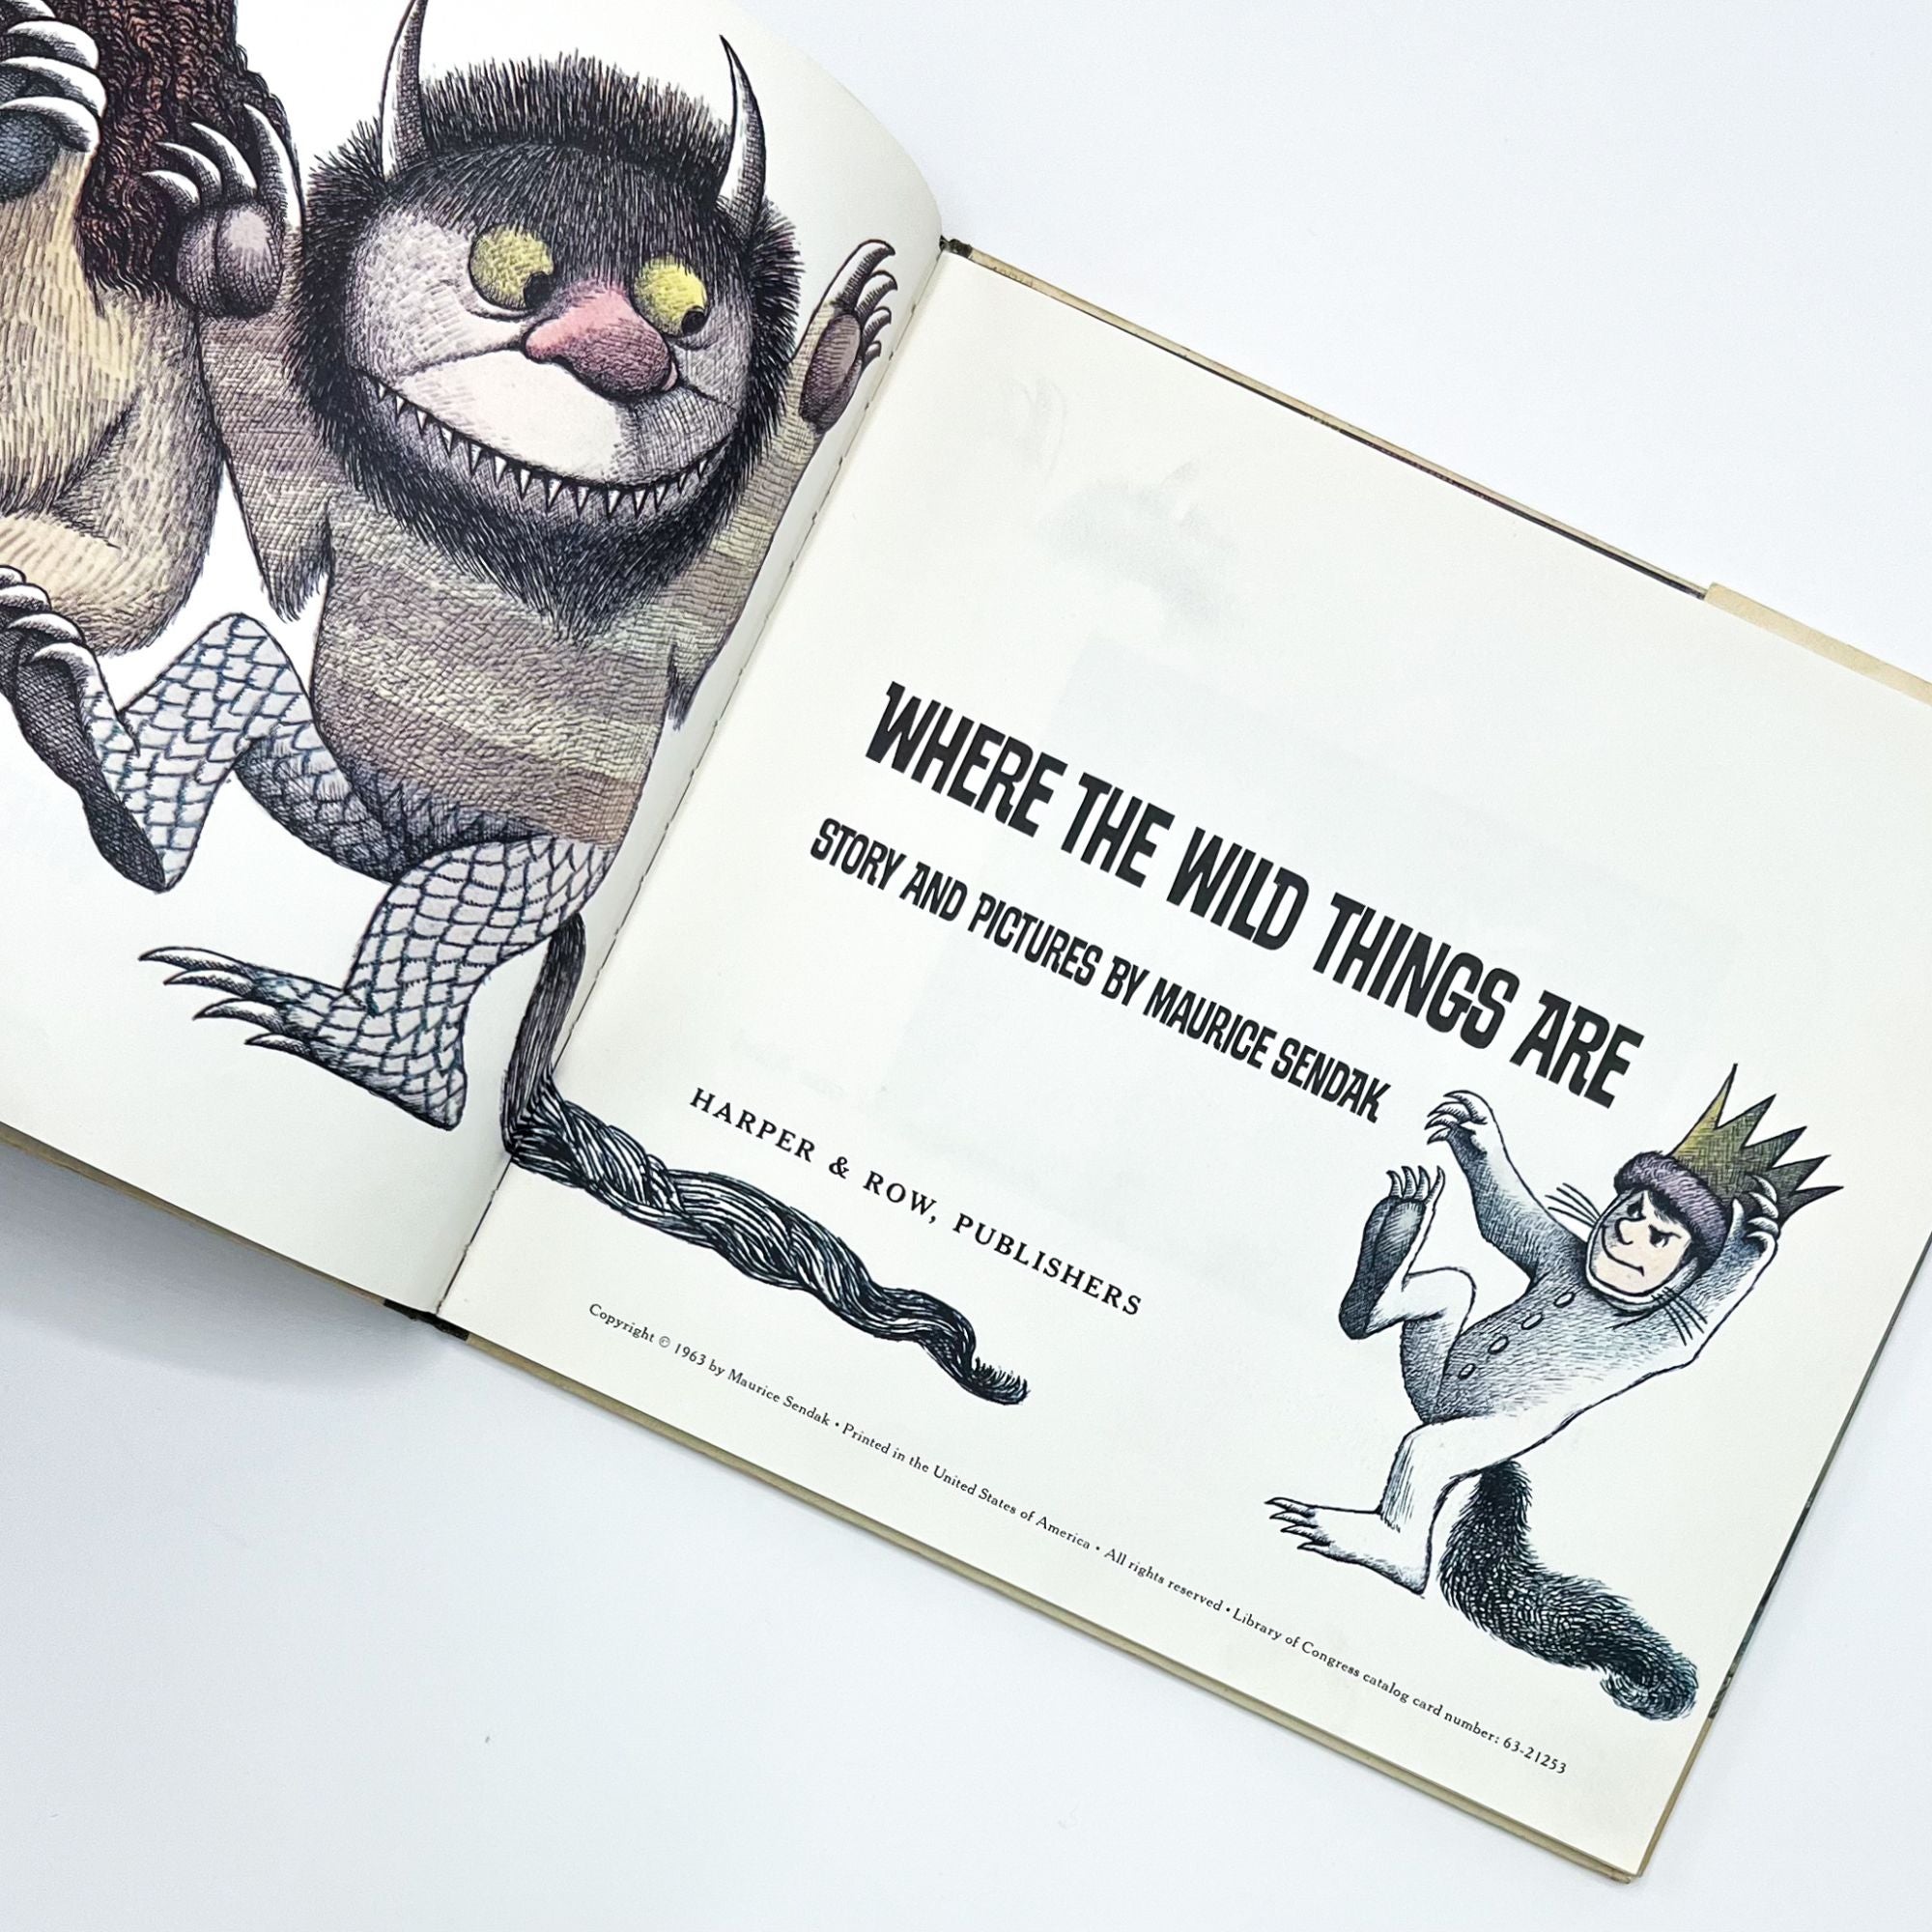 WHERE THE WILD THINGS ARE by Maurice Sendak on Type Punch Matrix